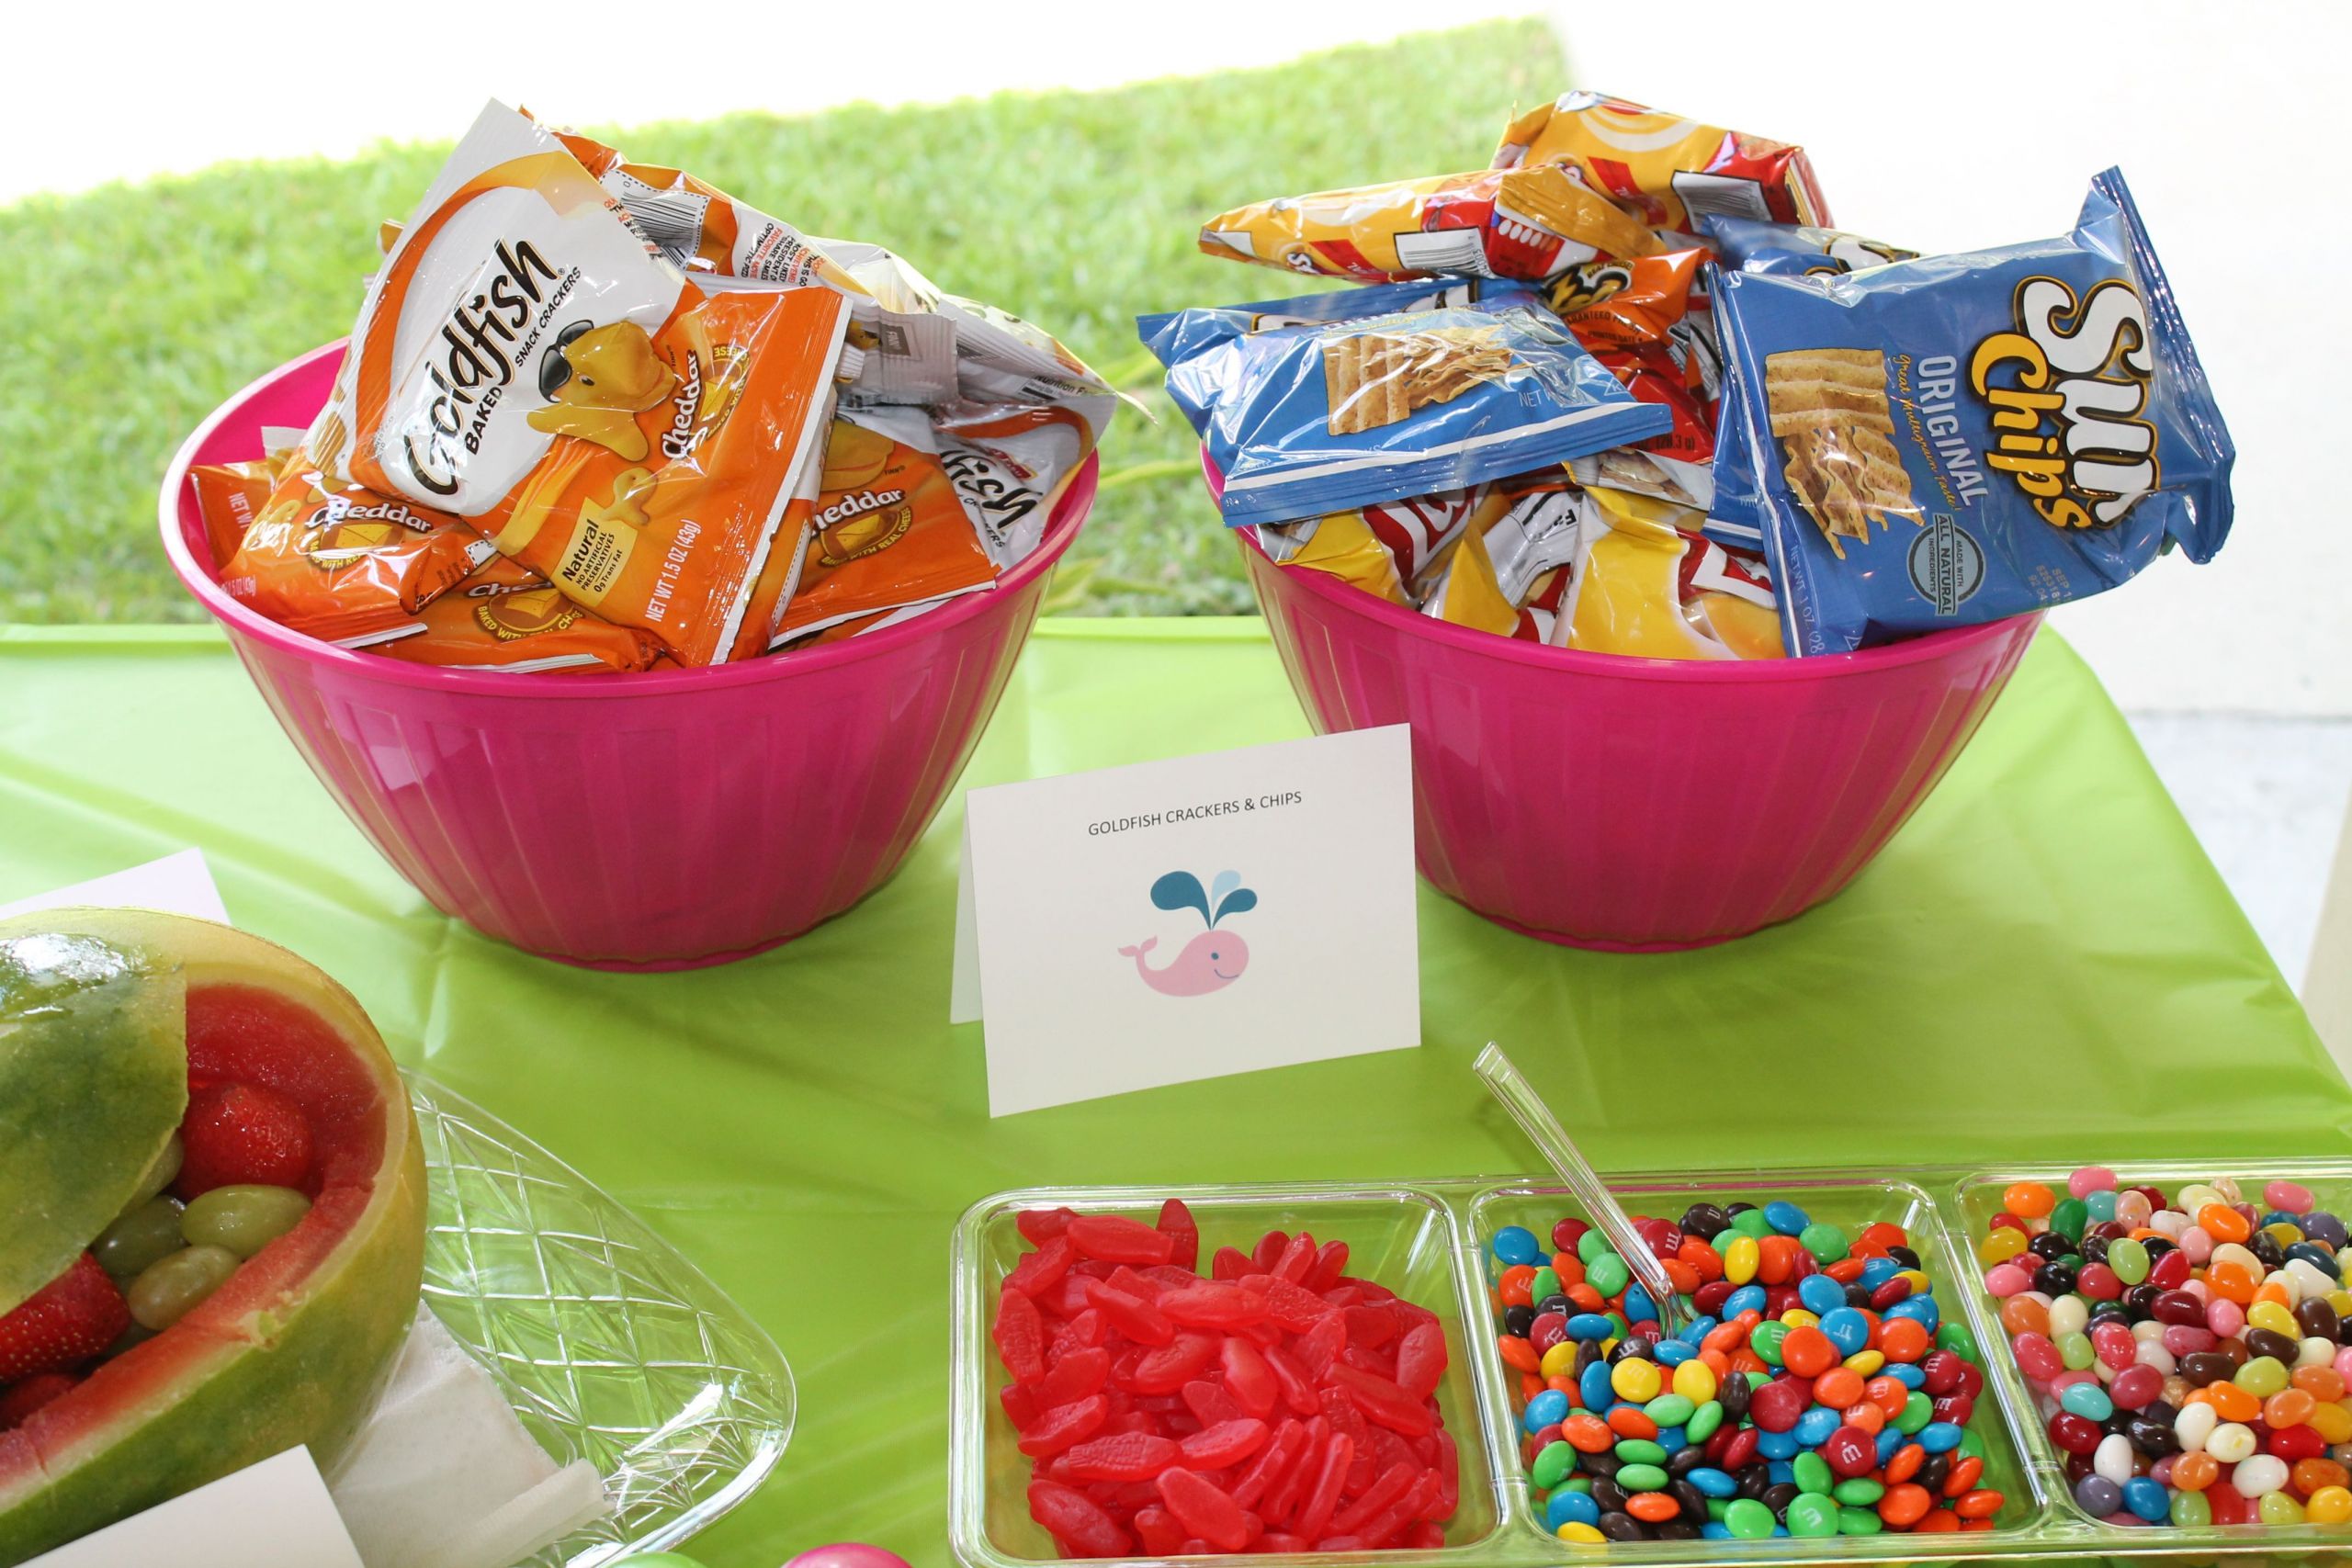 Pool Party Food Ideas For Teenagers
 Goldfish crackers fit the theme but the chips were more